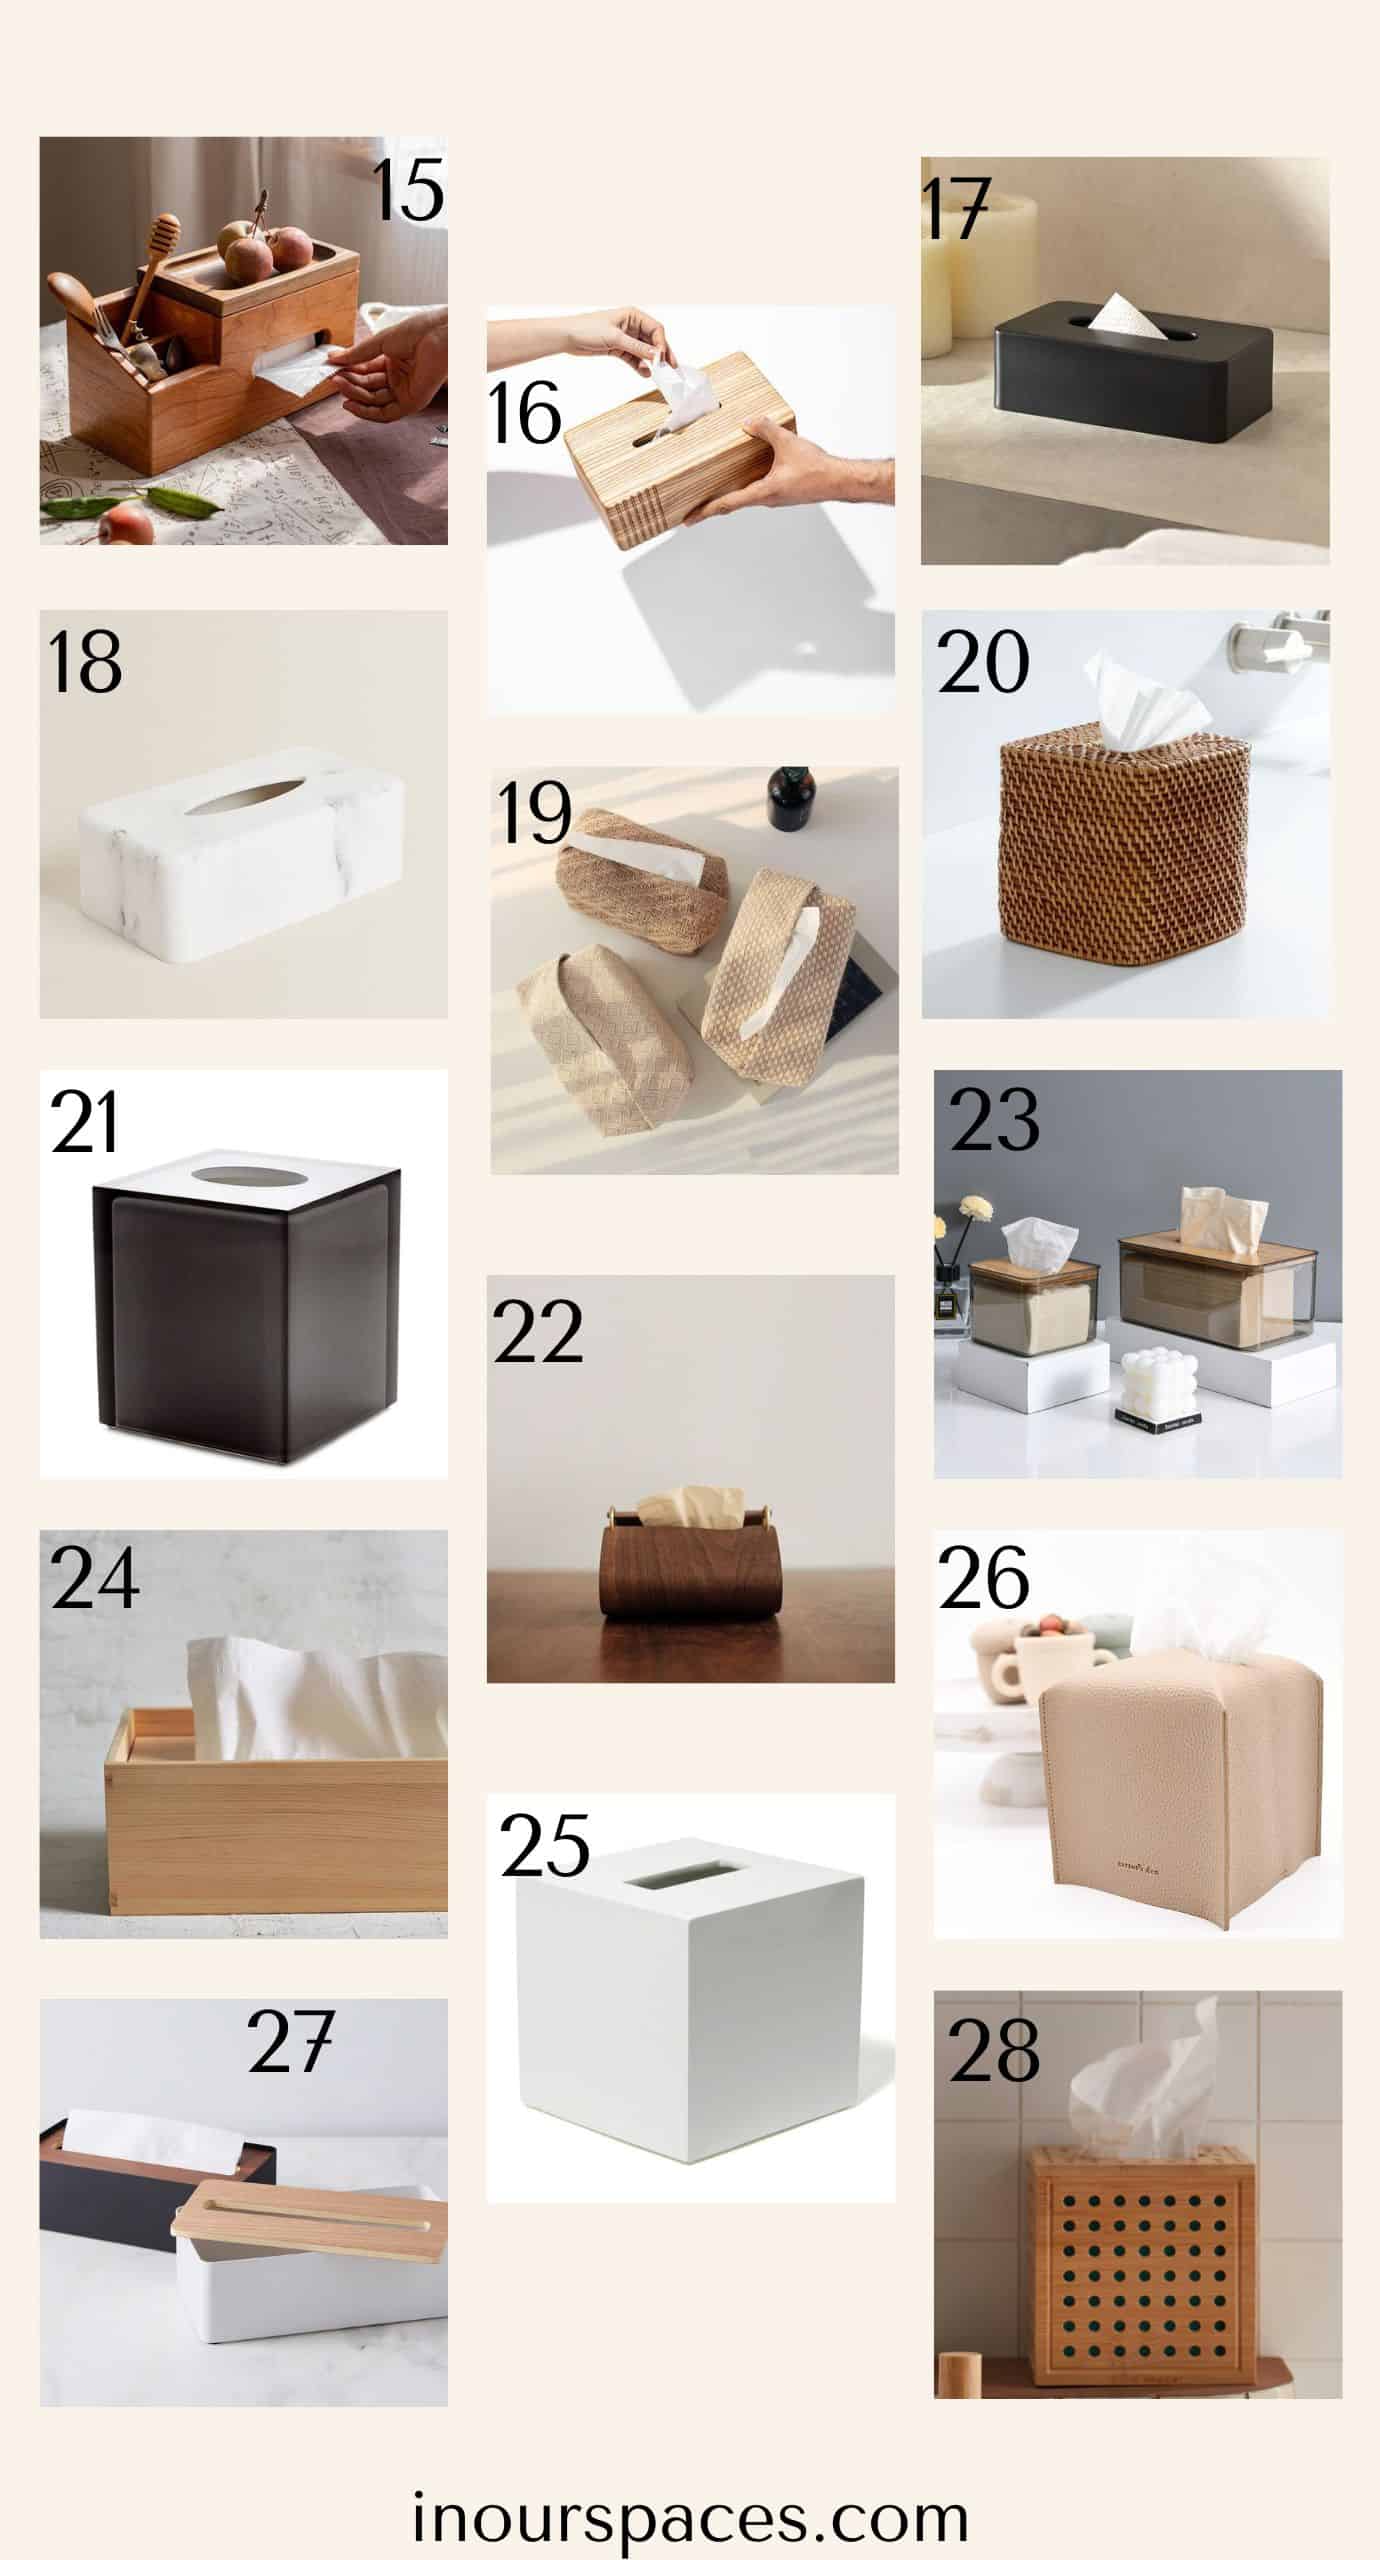 image of 14 tissue boxes cover